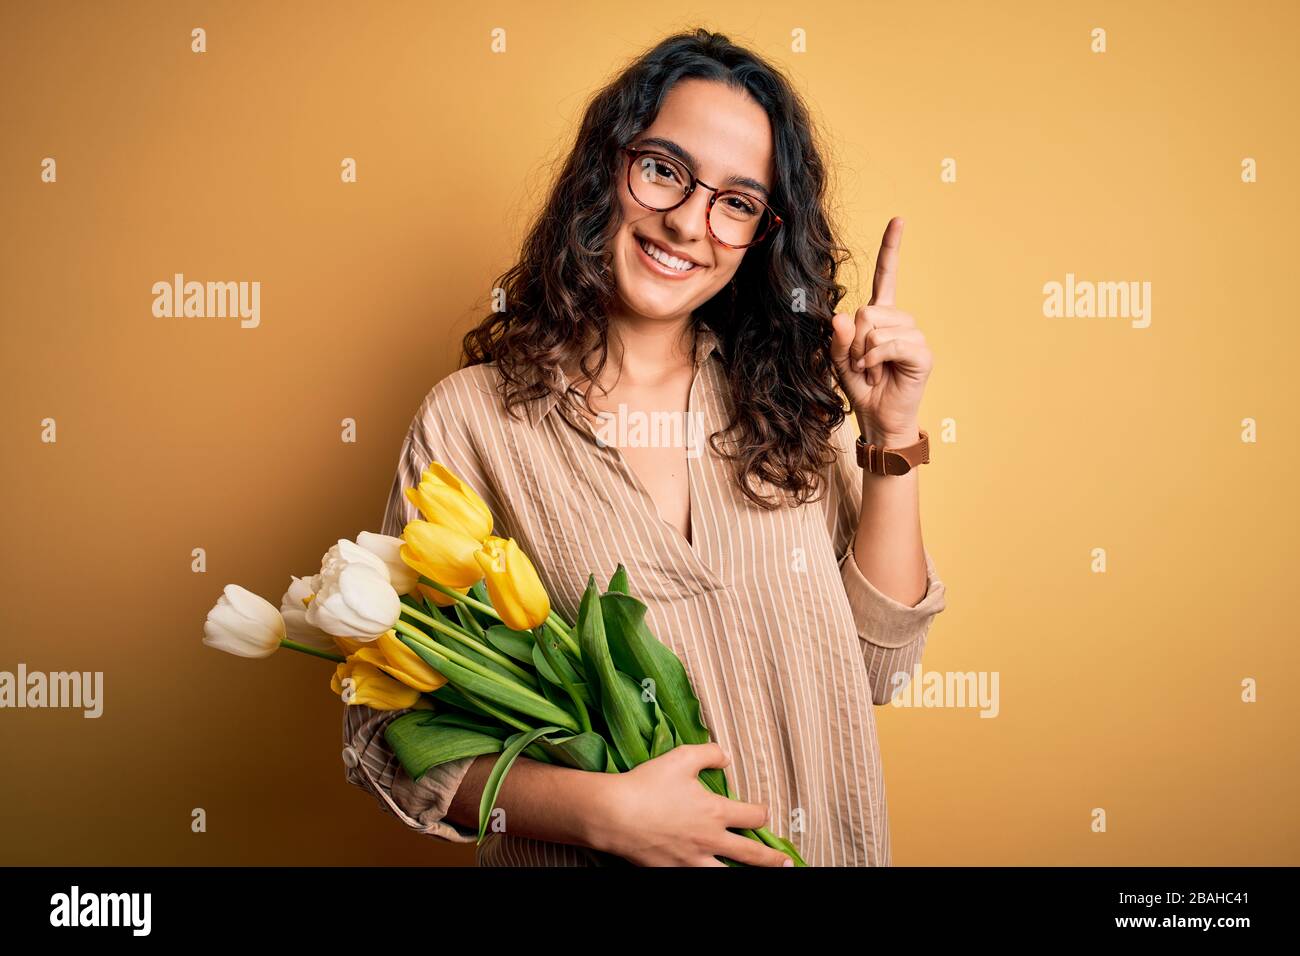 Young beautiful romantic woman with curly hair holding bouquet of yellow tulips smiling amazed and surprised and pointing up with fingers and raised a Stock Photo